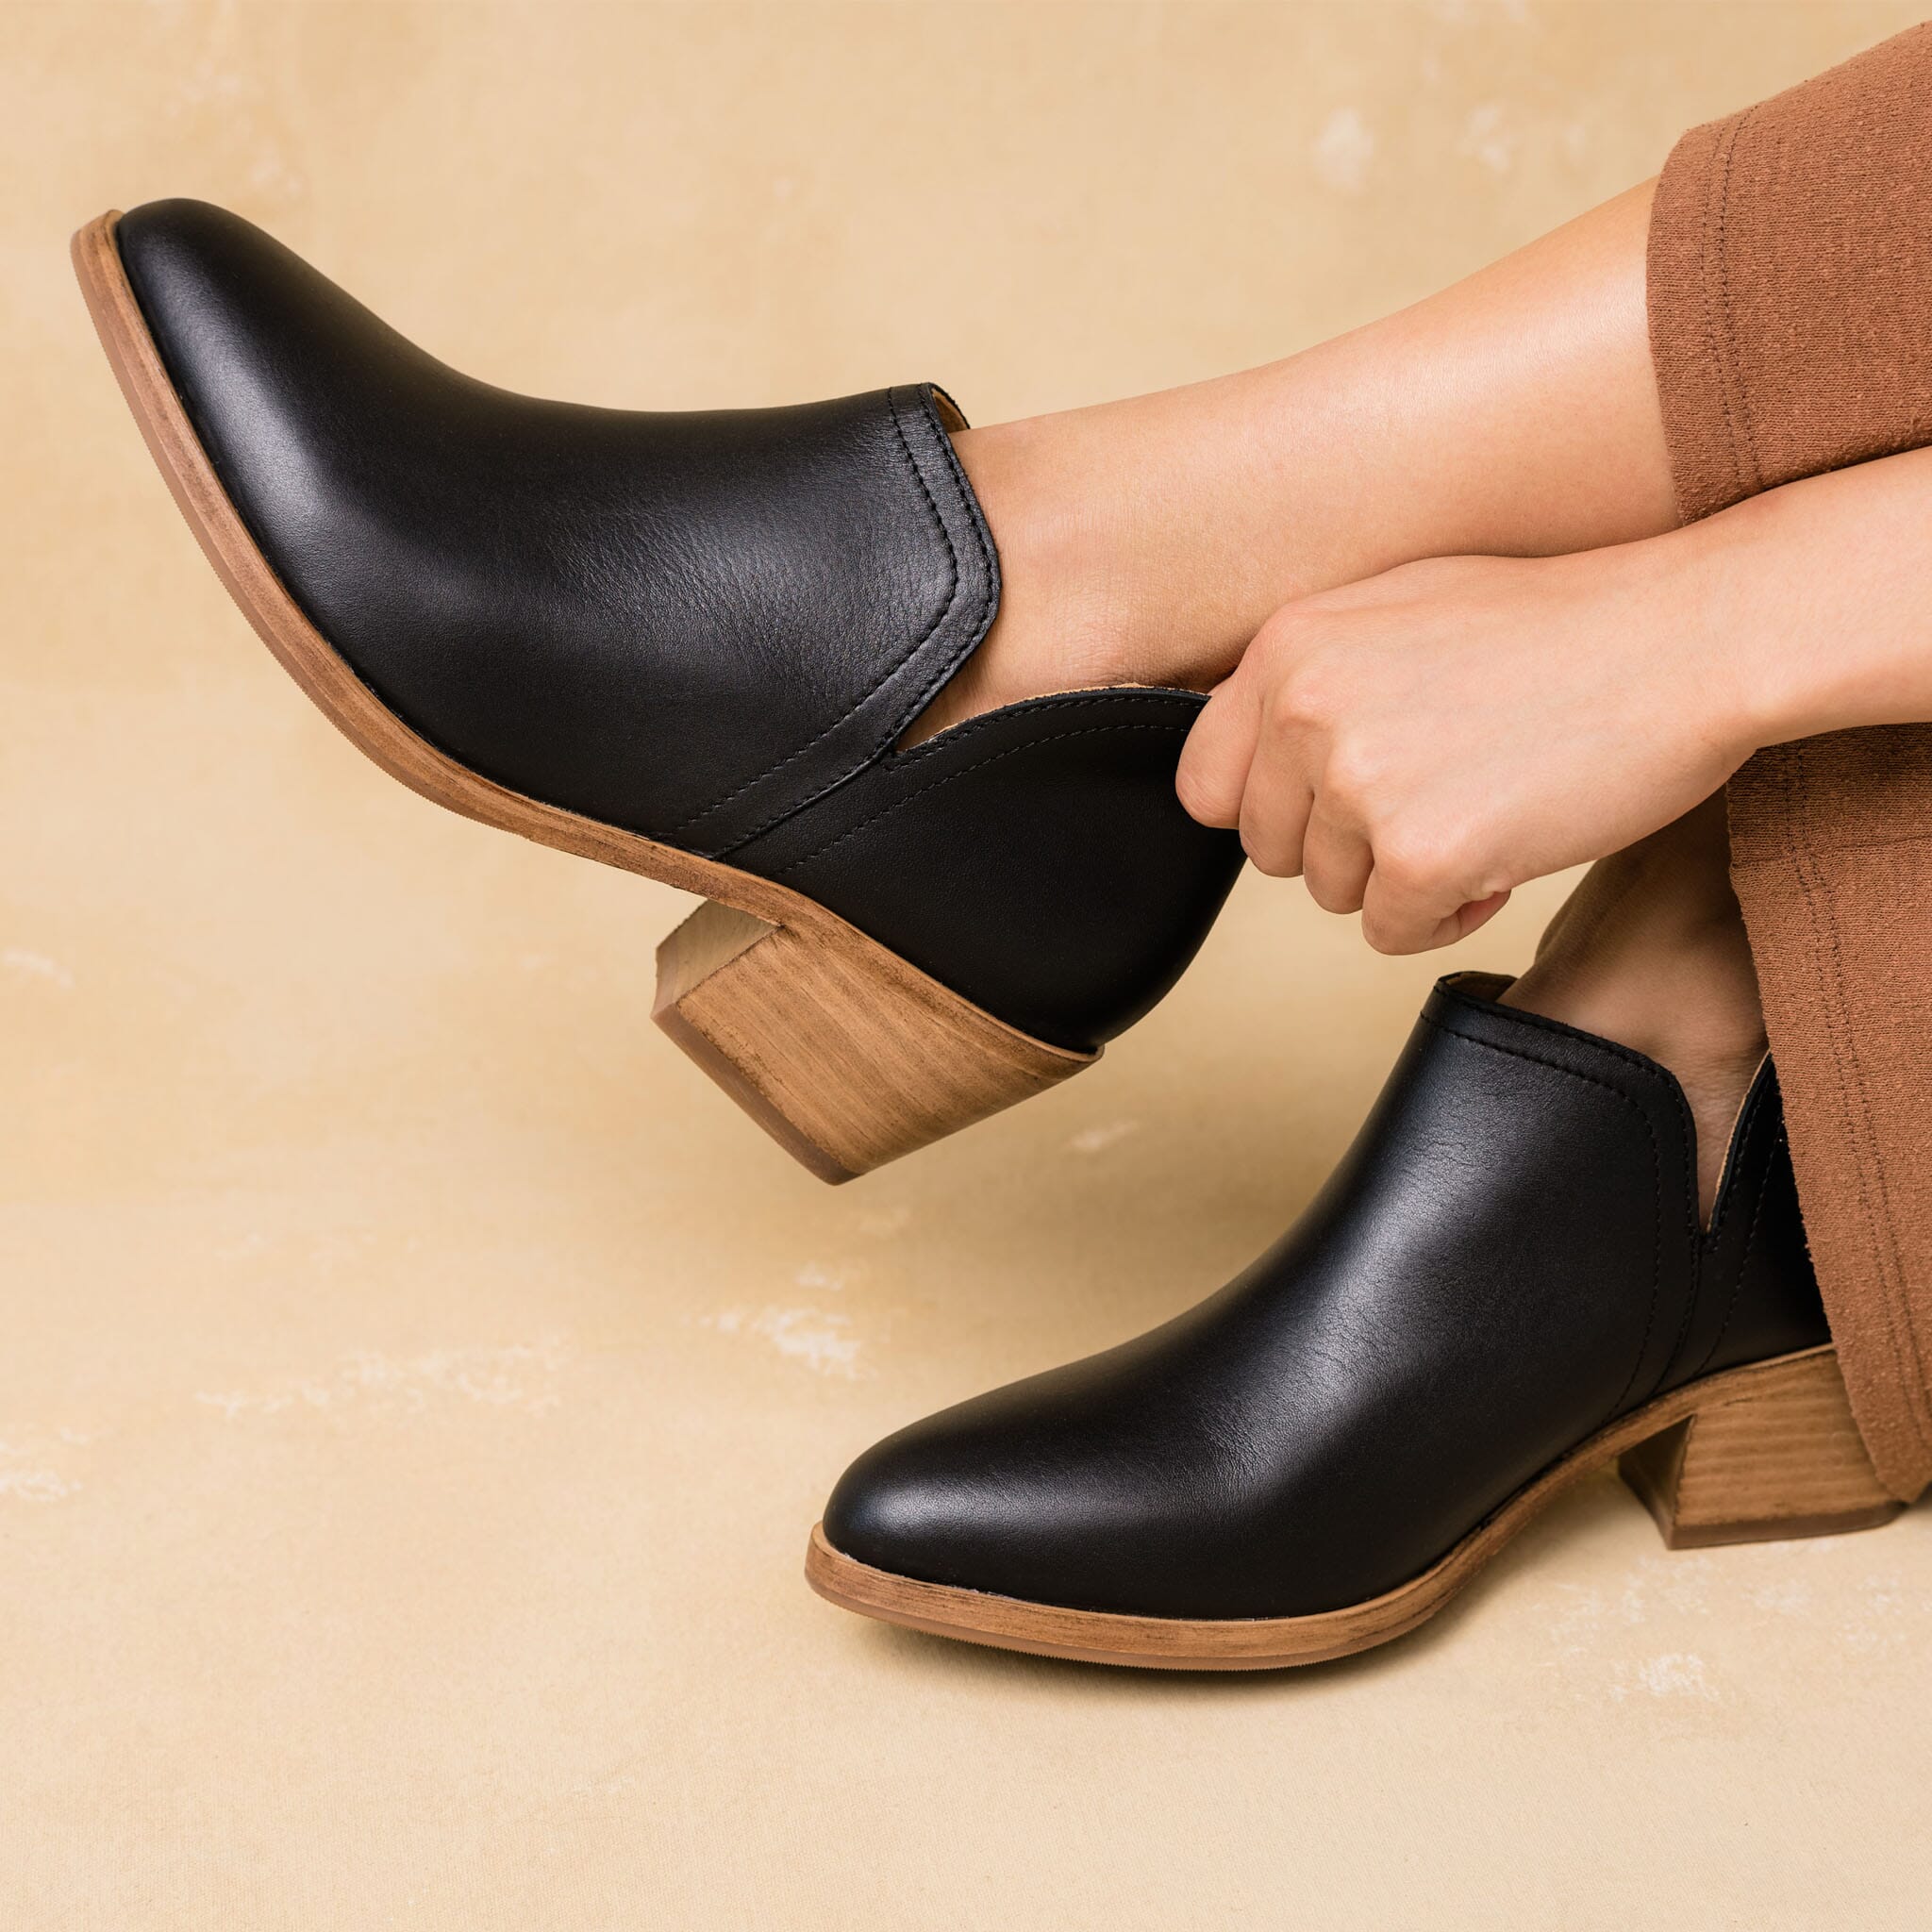 Best Flat Black Leather Ankle Boots for Women: Low-Heel Black Booties